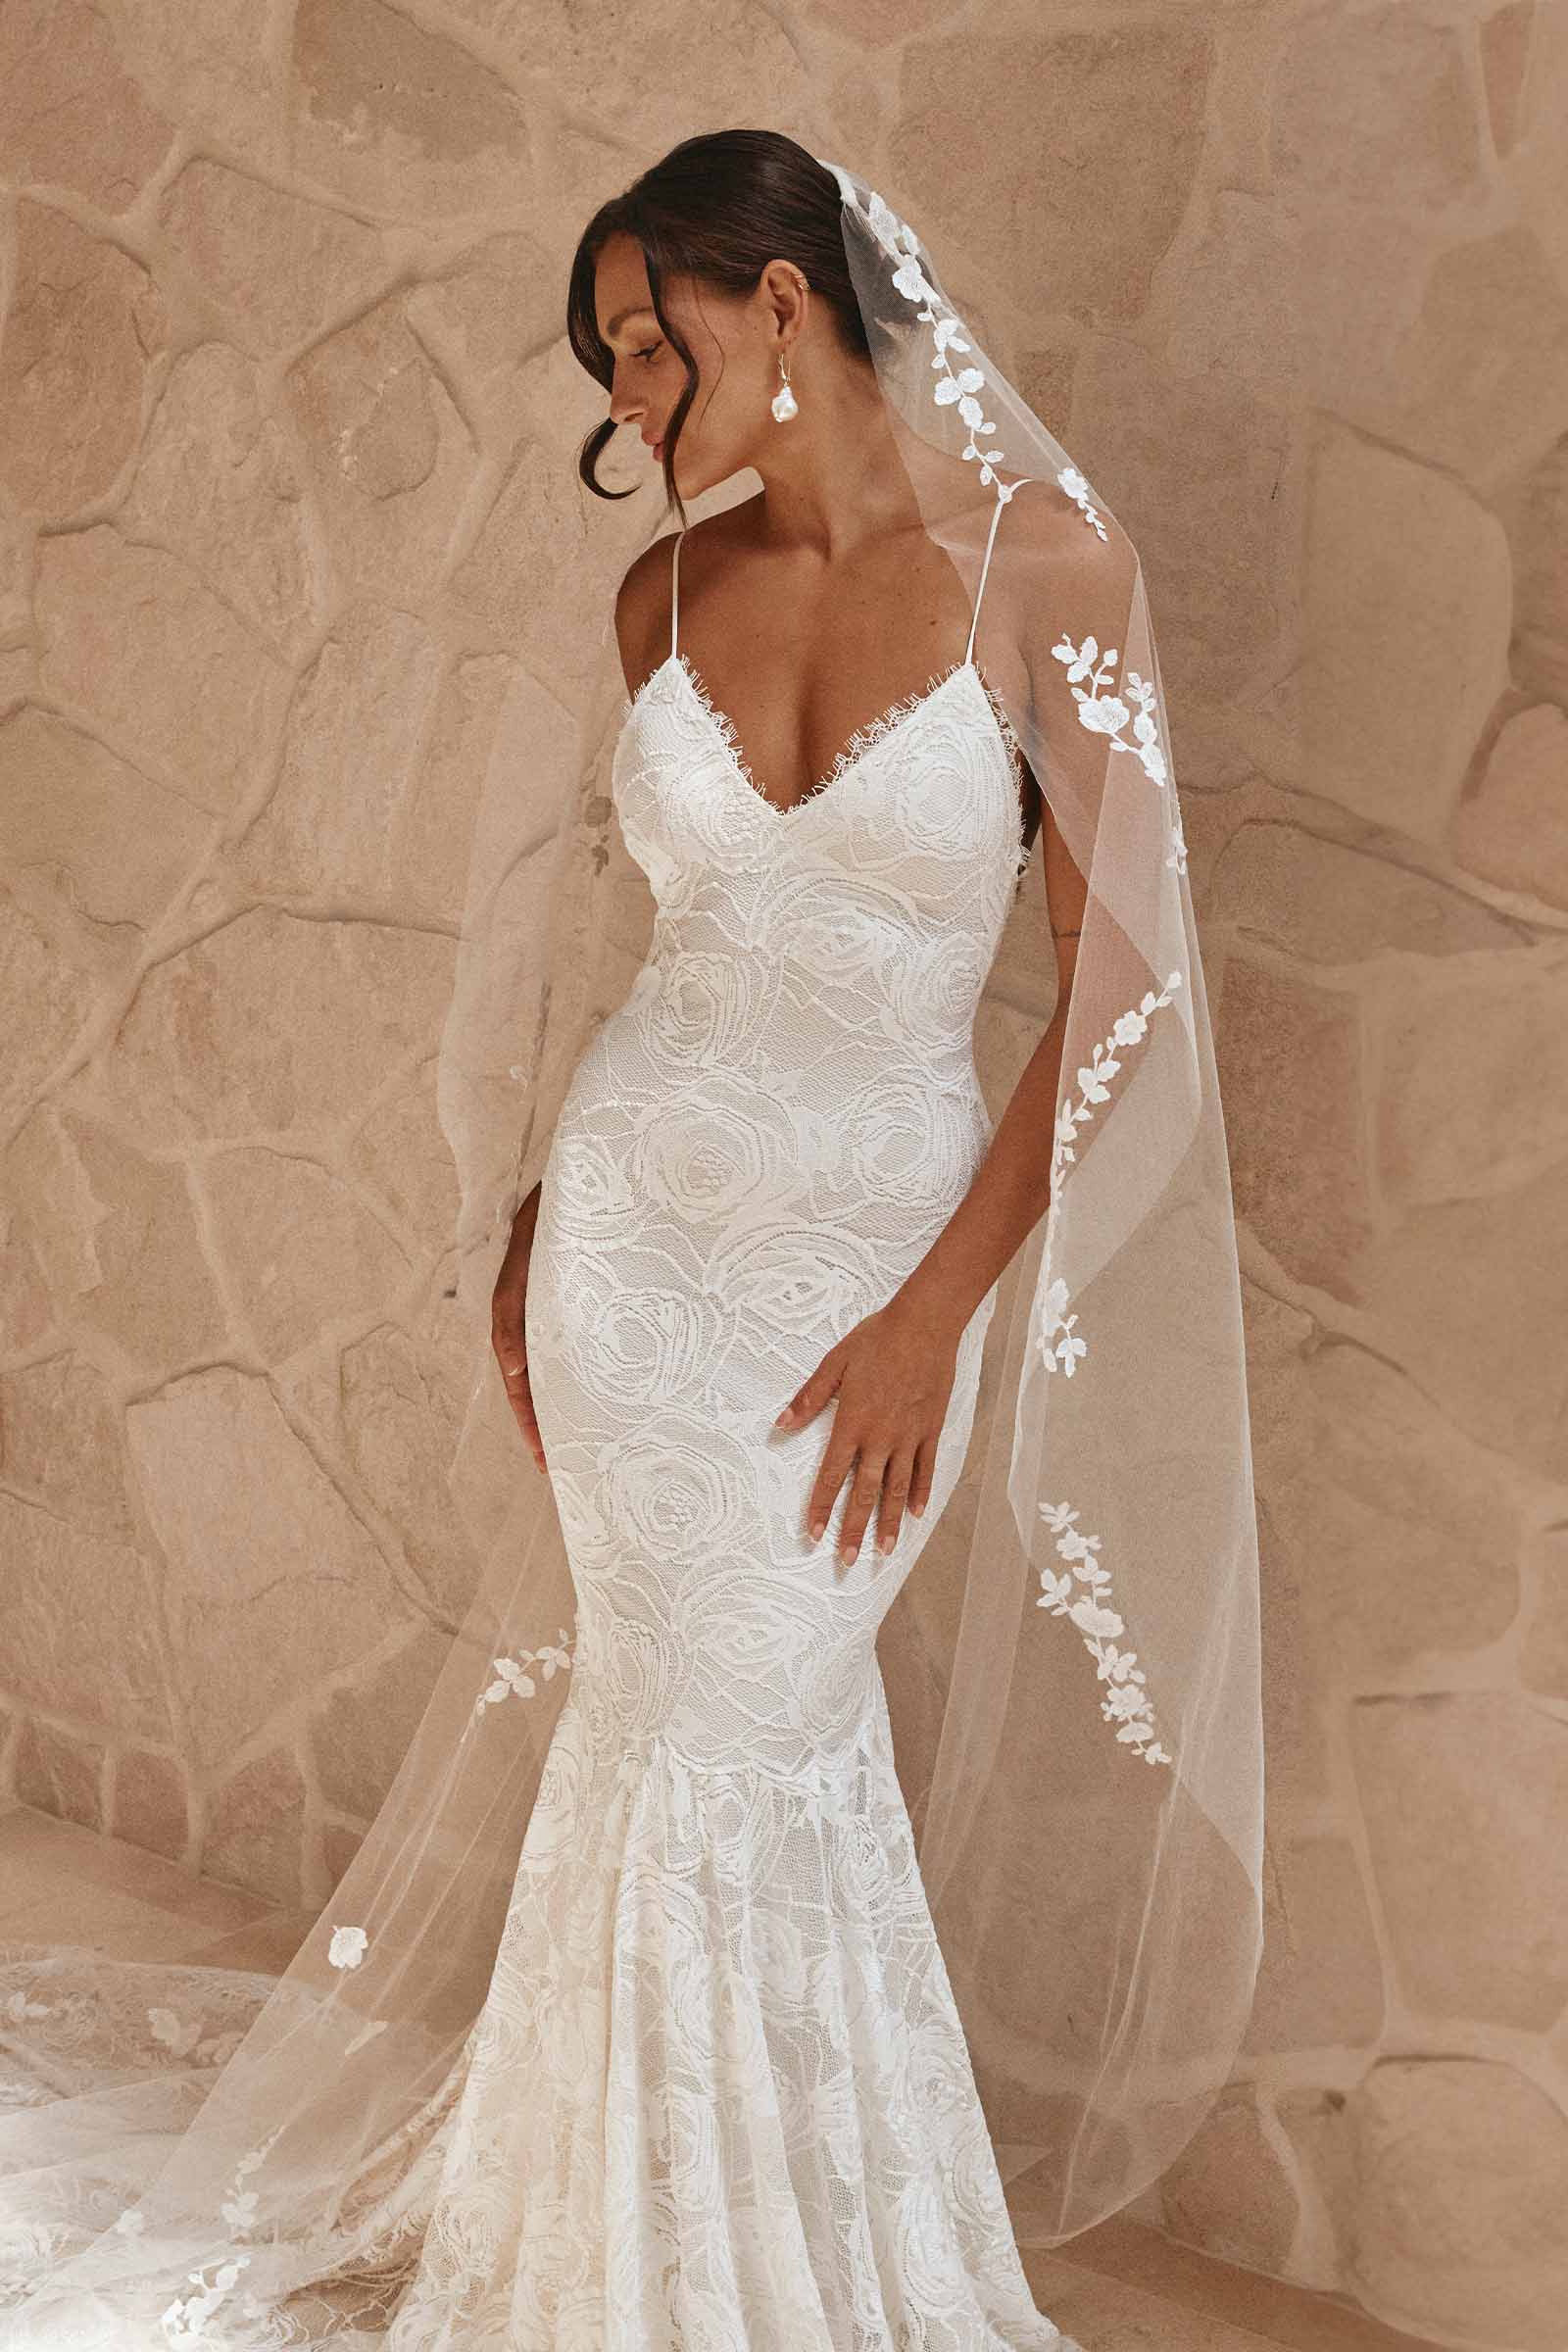 Clo Gown | Lace Wedding Dress | Made to Order Standard